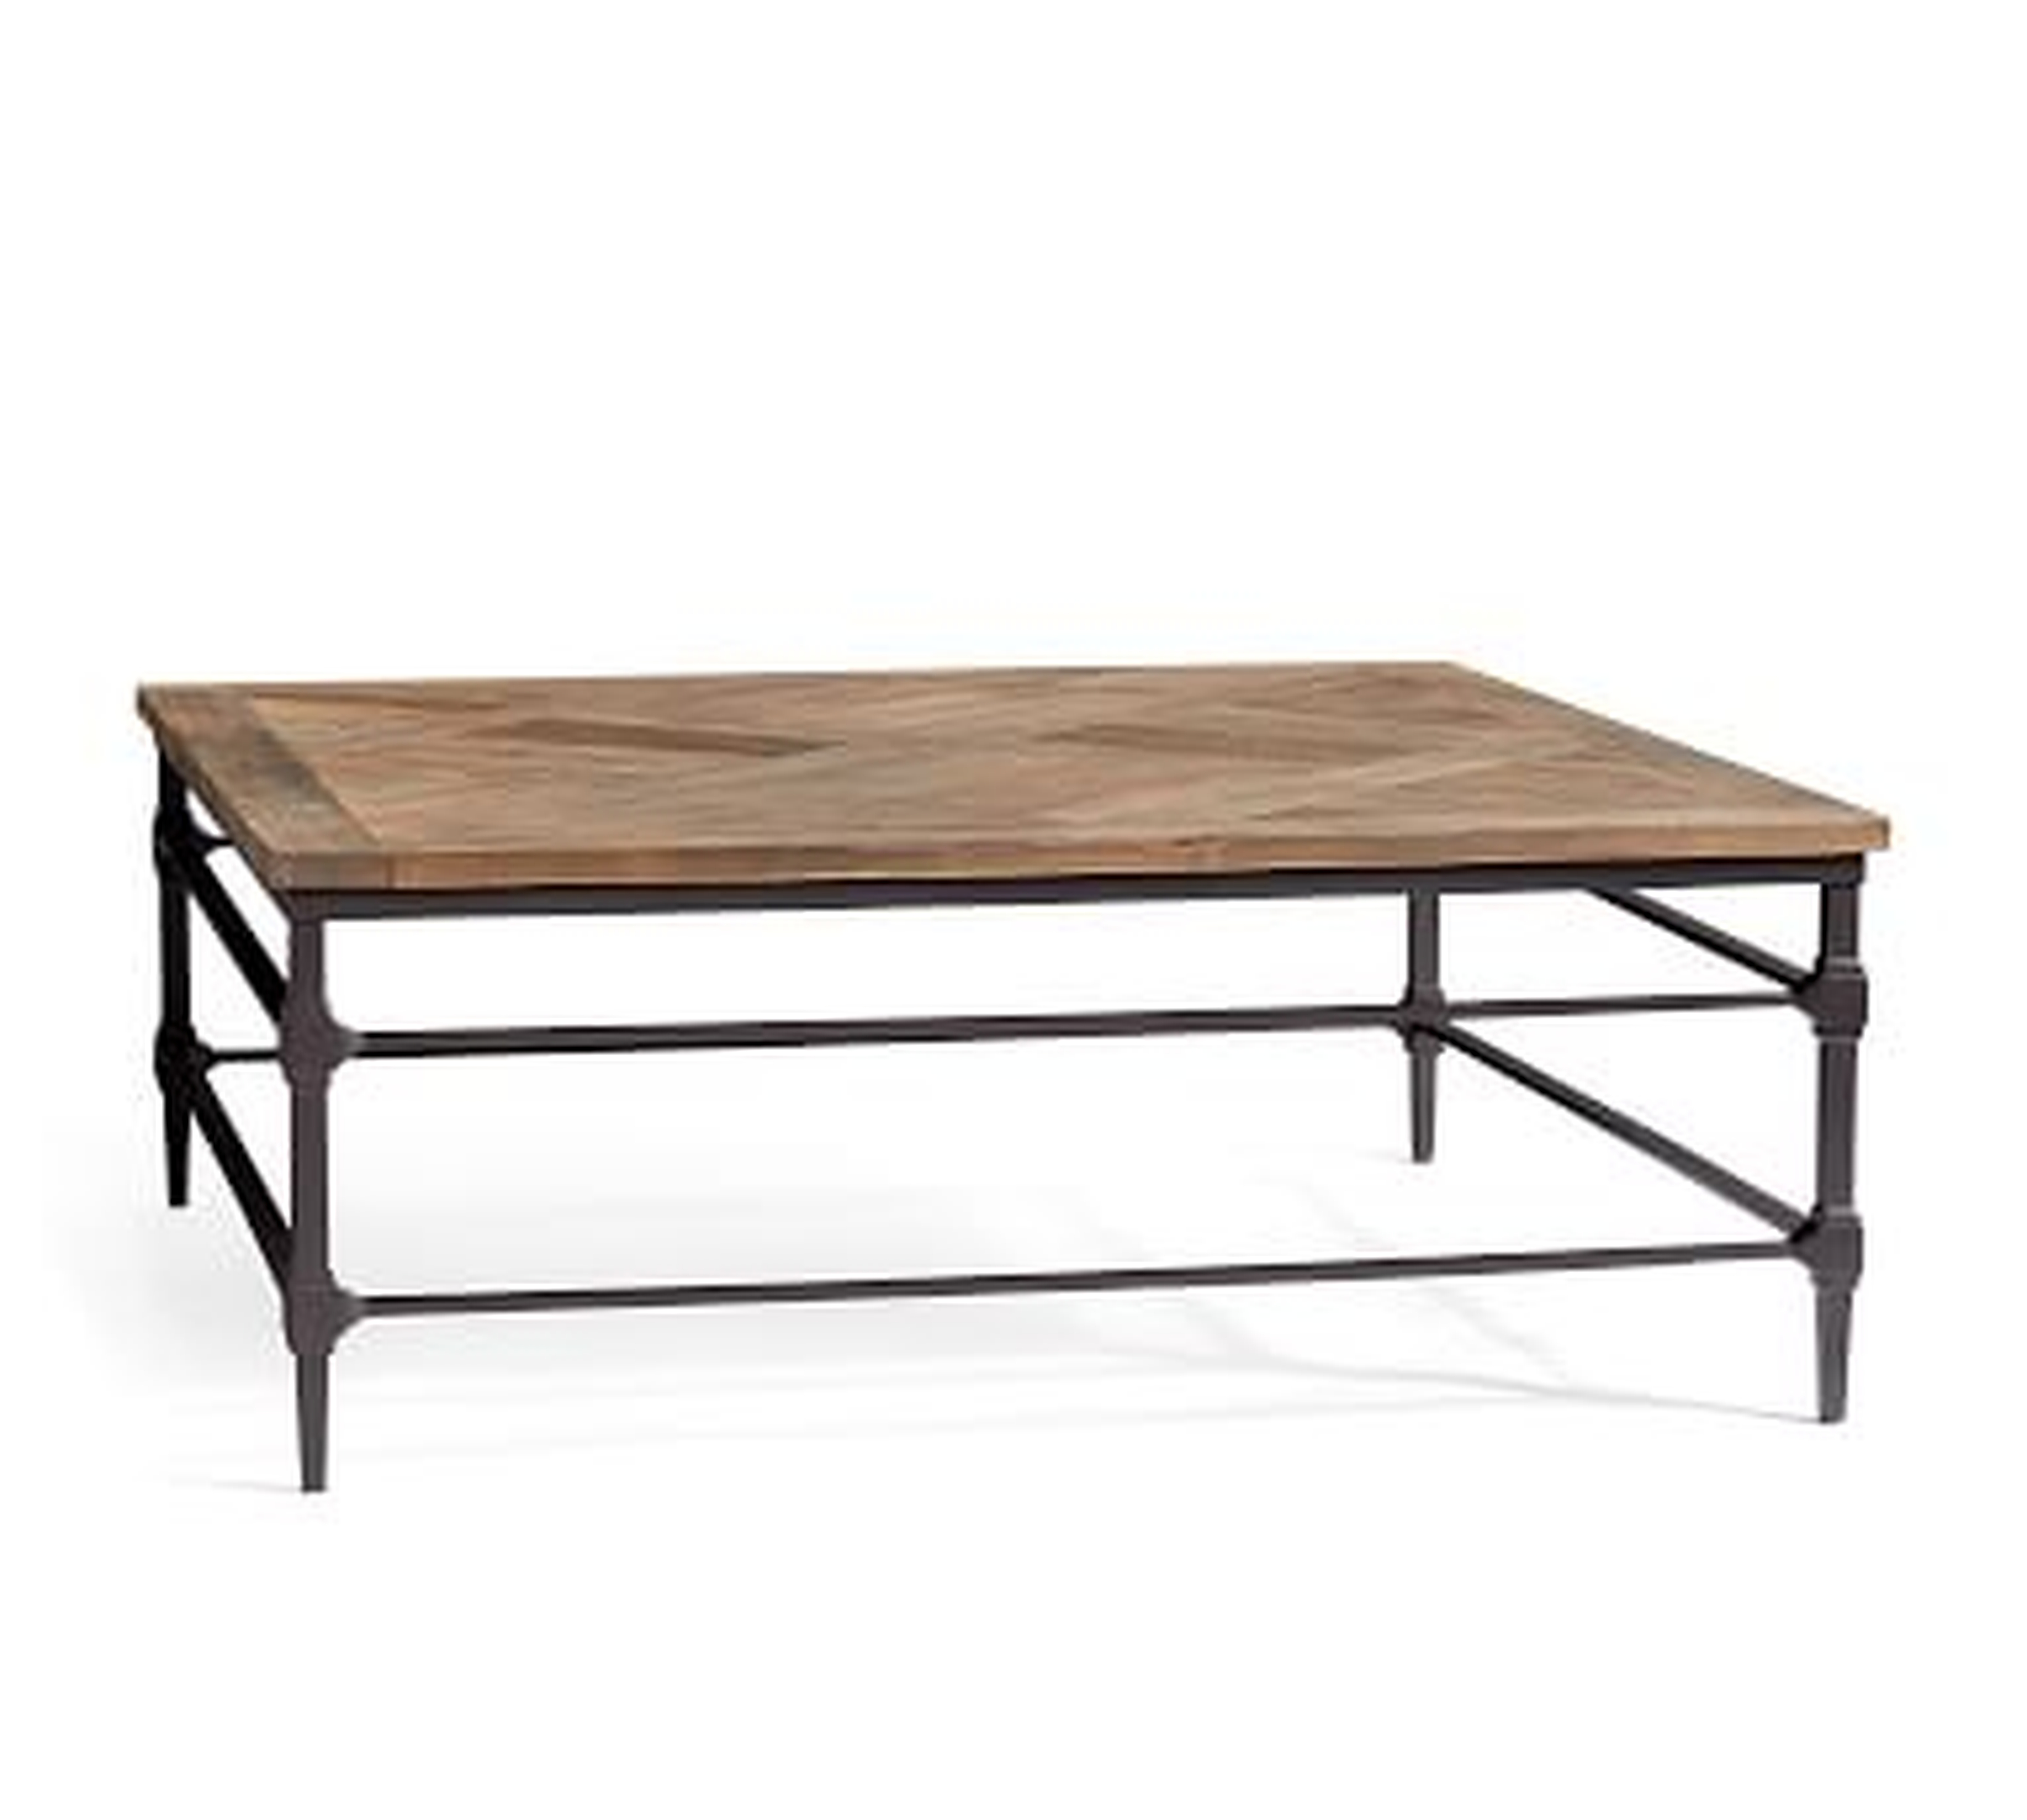 Parquet Reclaimed Wood Square Coffee Table, Reclaimed Elm, 46"L - Pottery Barn